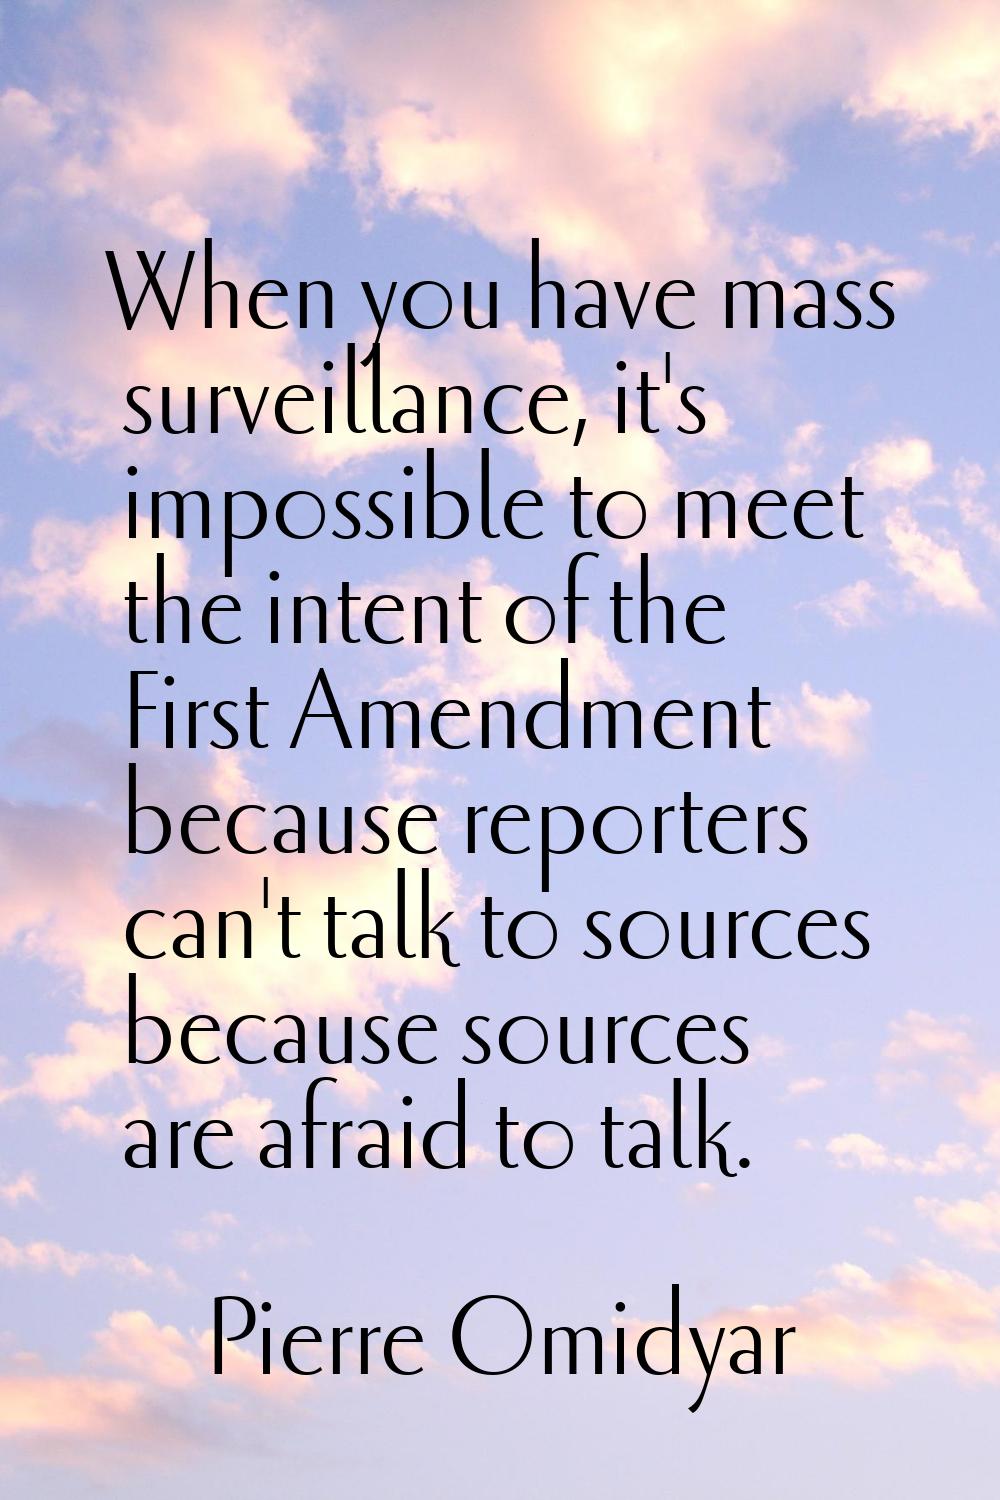 When you have mass surveillance, it's impossible to meet the intent of the First Amendment because 